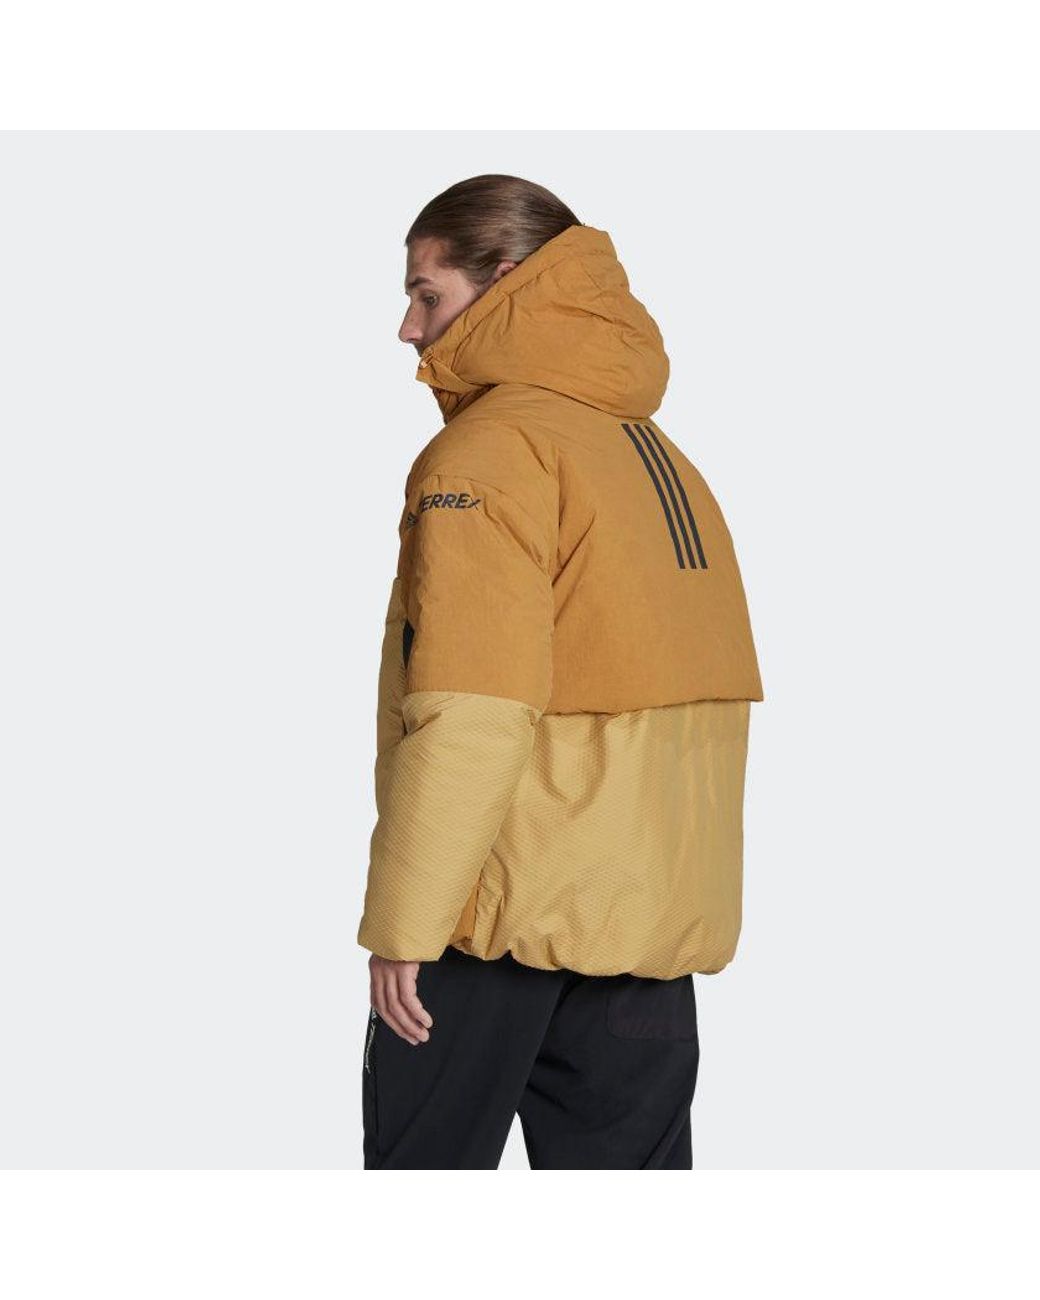 | Cold.rdy adidas Lyst for Terrex Men Jacket Natural in Myshelter